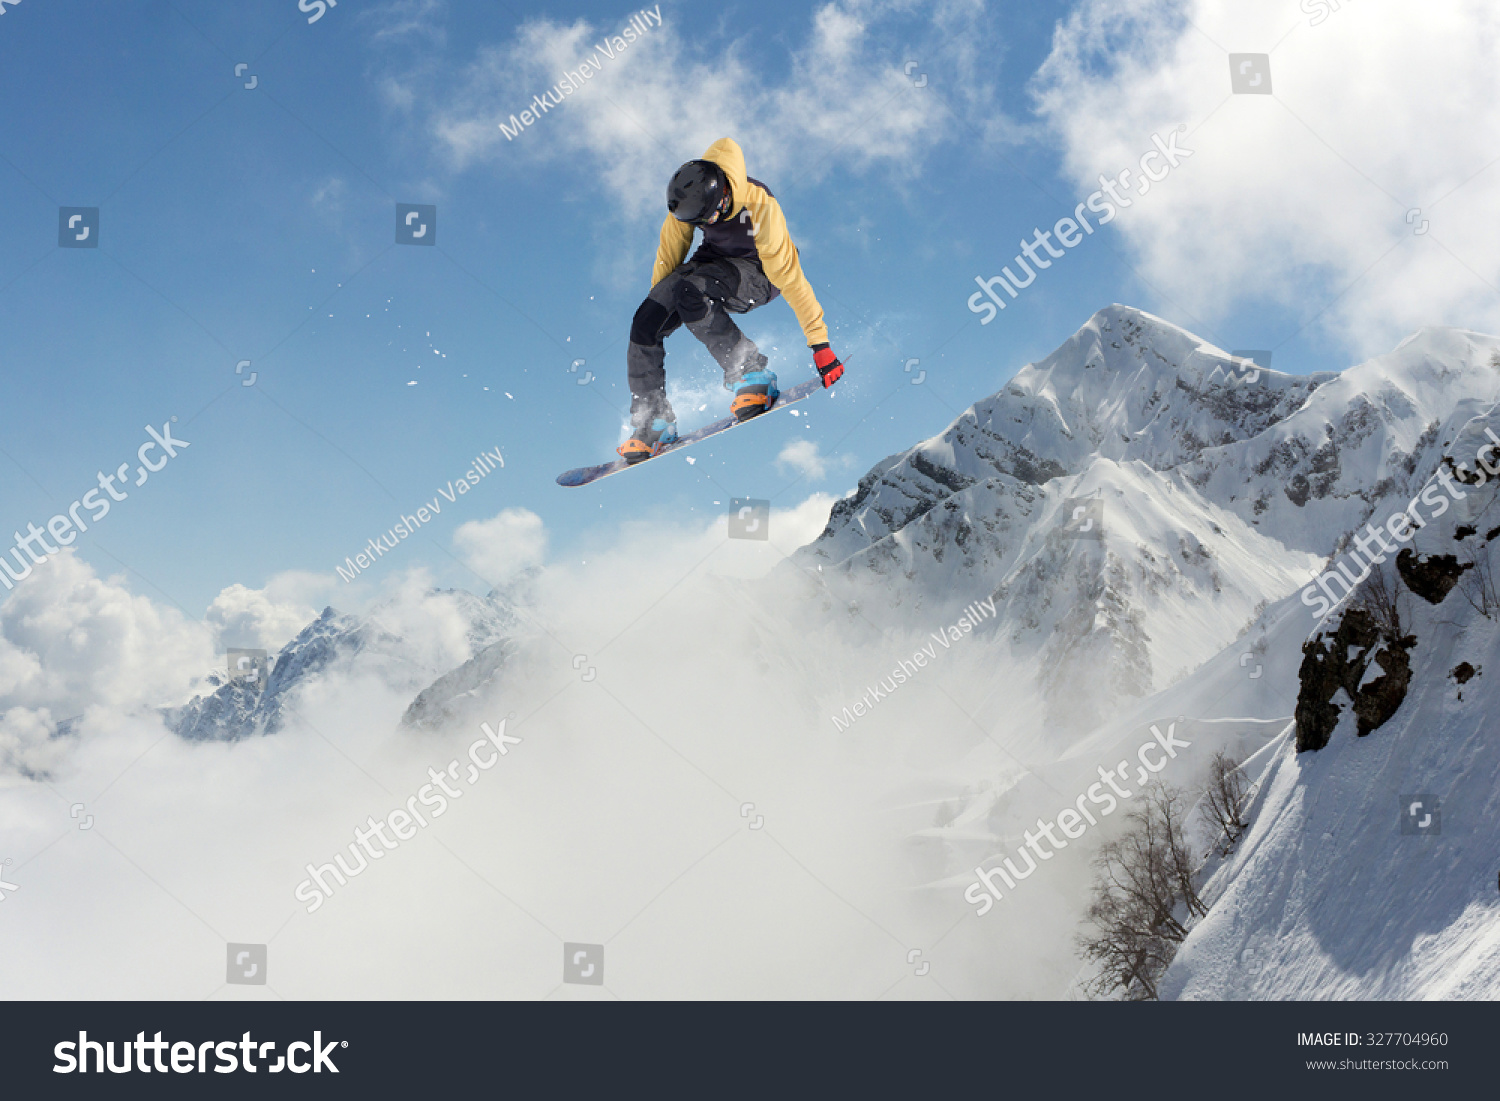 Flying snowboarder on mountains, extreme sport #327704960